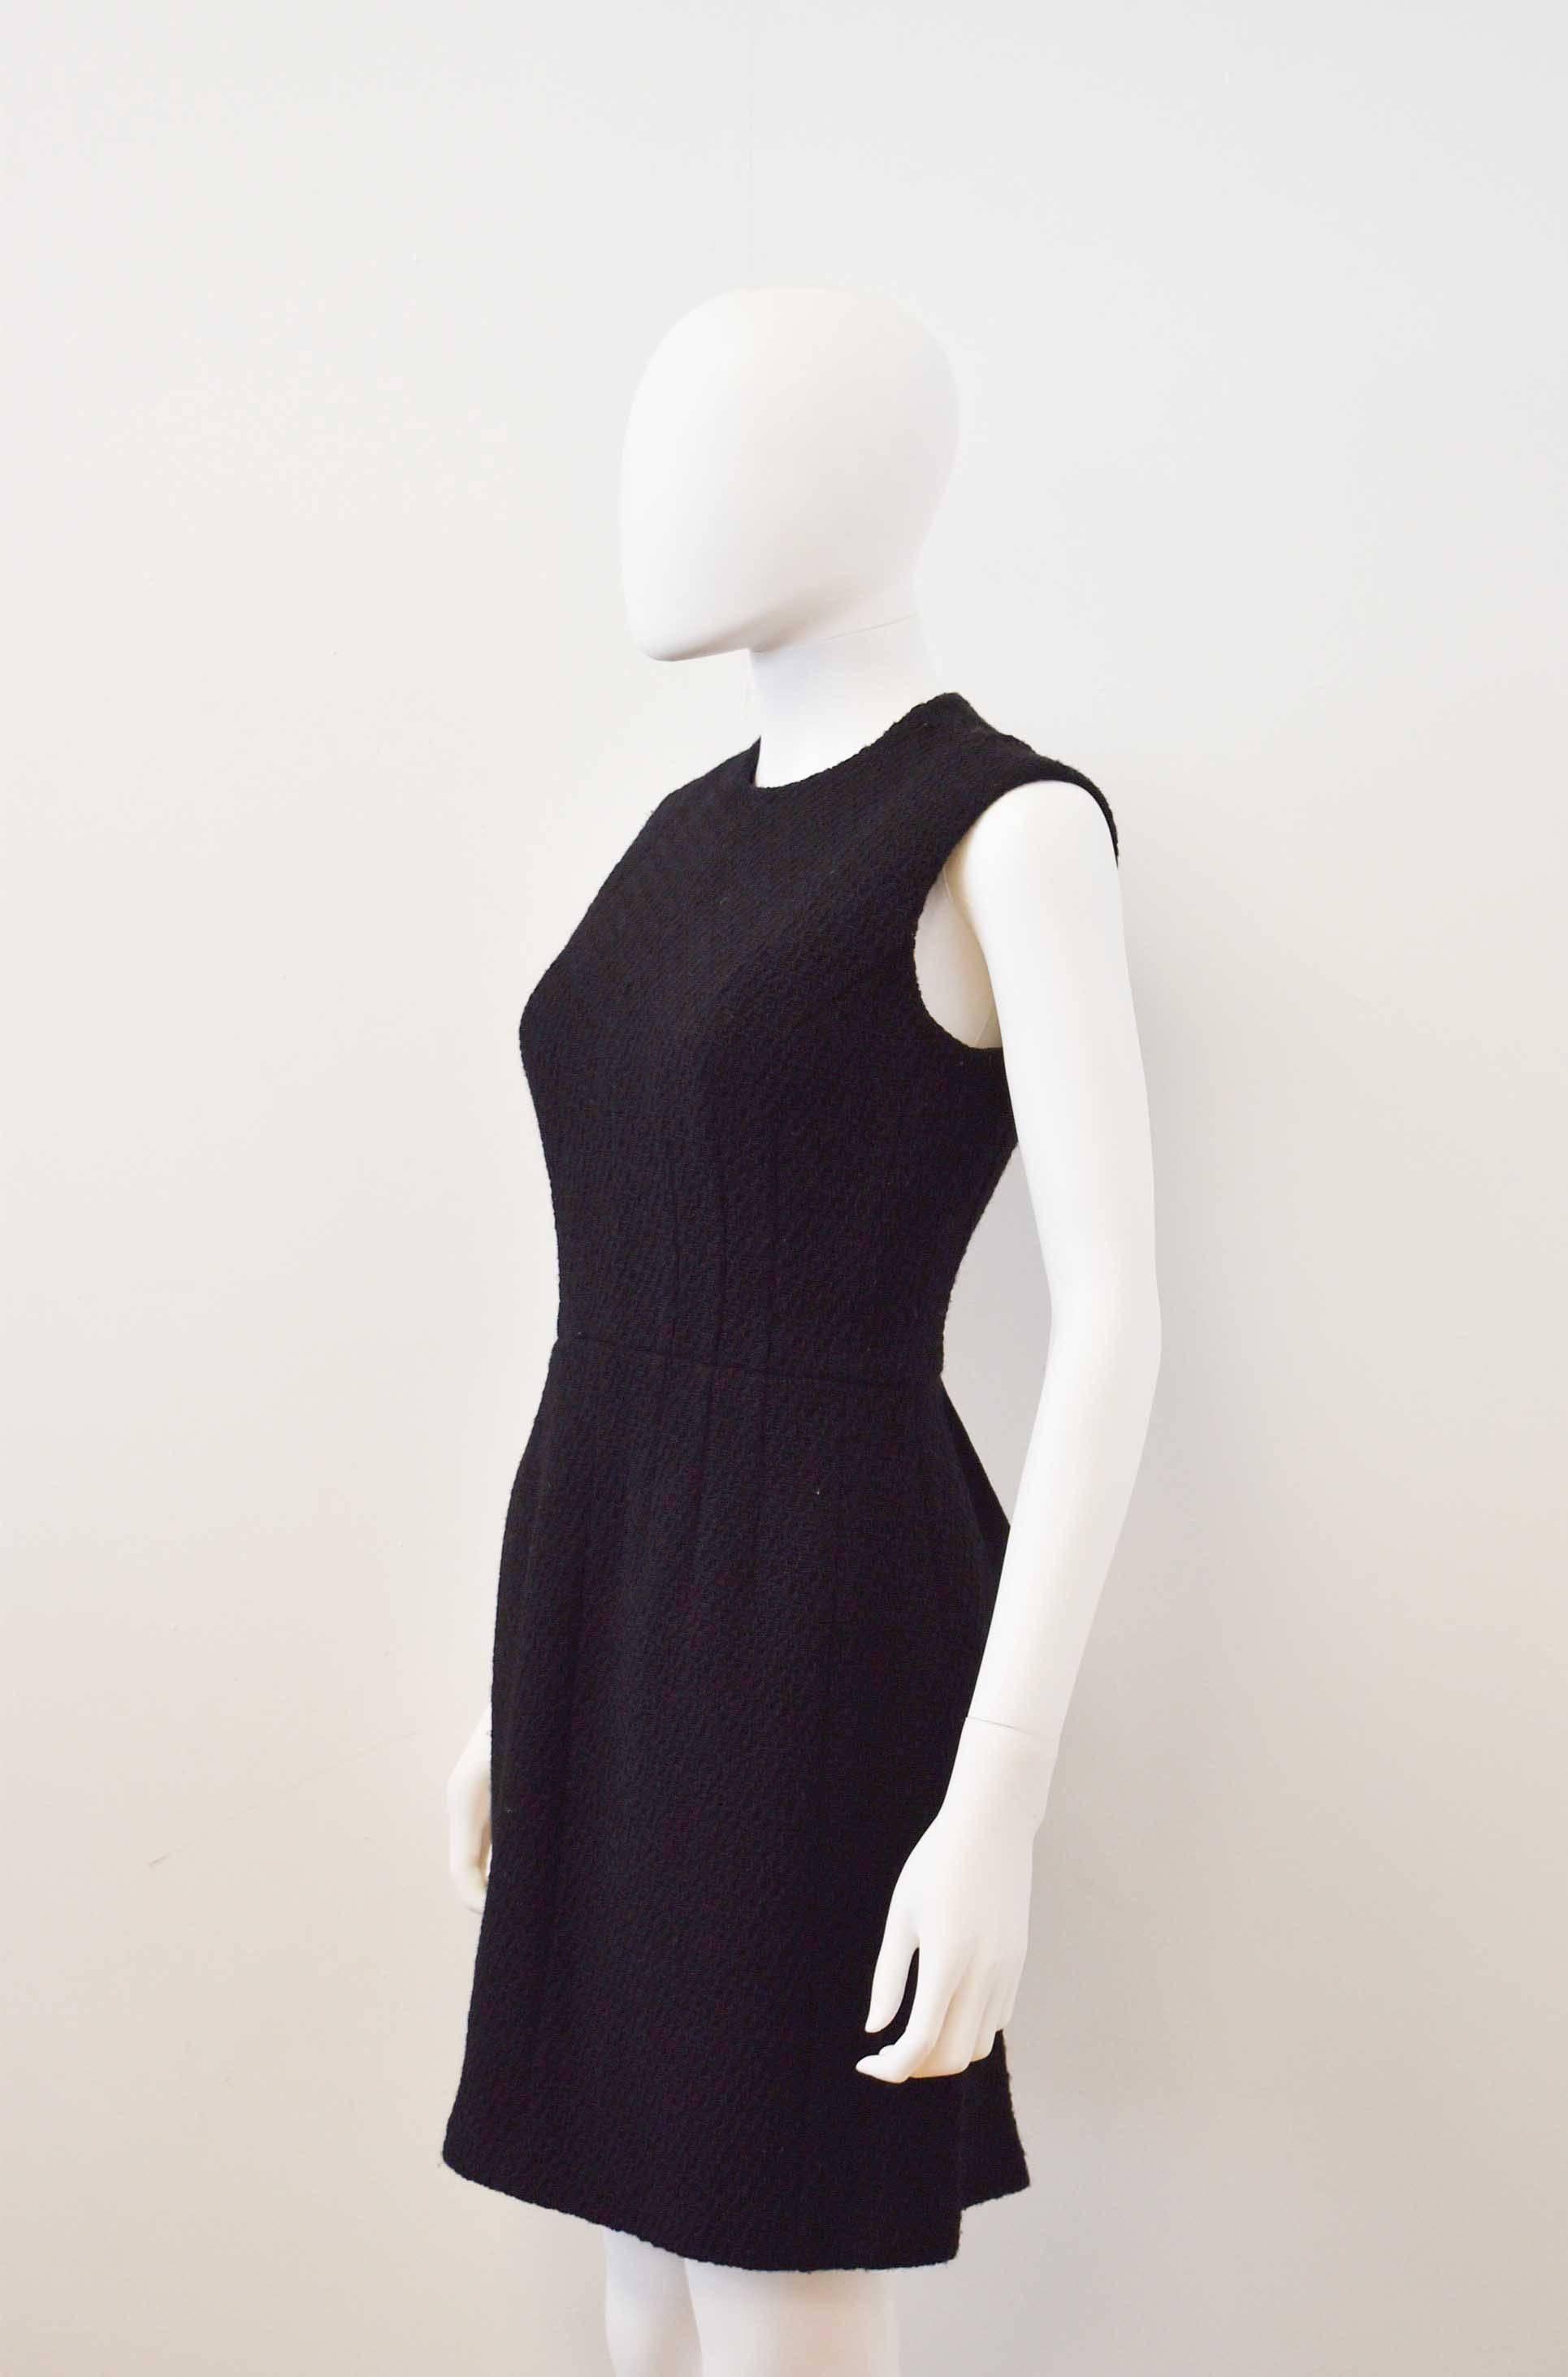 A black boucle wool shift dress by Comme des Garçons designer Junya Watanabe. The sleeveless dress has a simple, classic shift shape and a deconstructed twist with an open ‘apron’ back with a ribbon tie. The dress is 1997 and in excellent condition